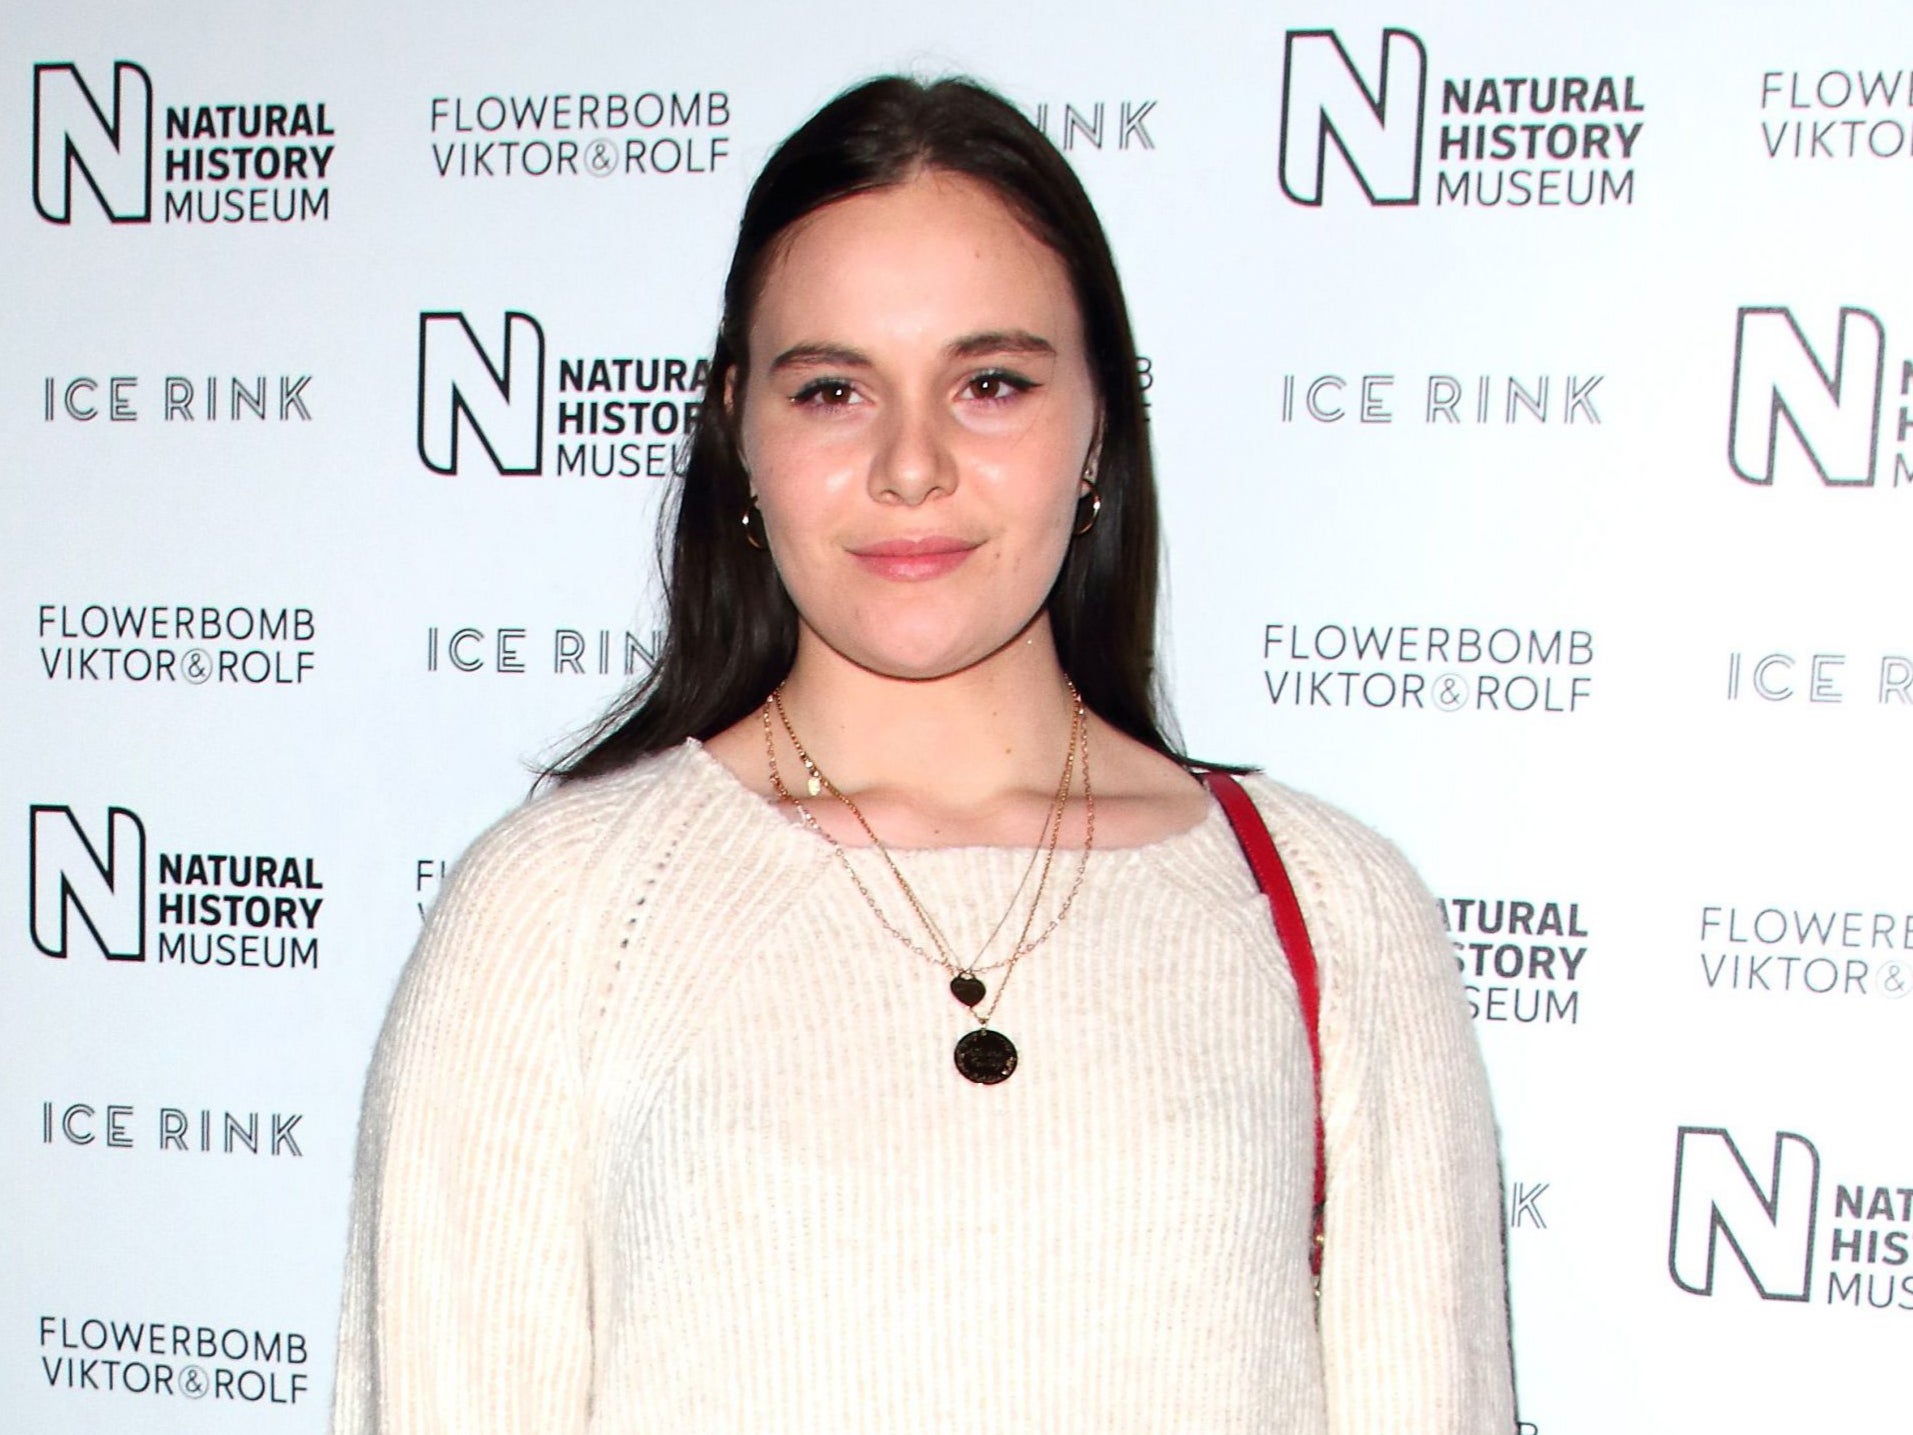 Holly Ramsay attends the Natural History Museum Ice Rink launch party, 2019